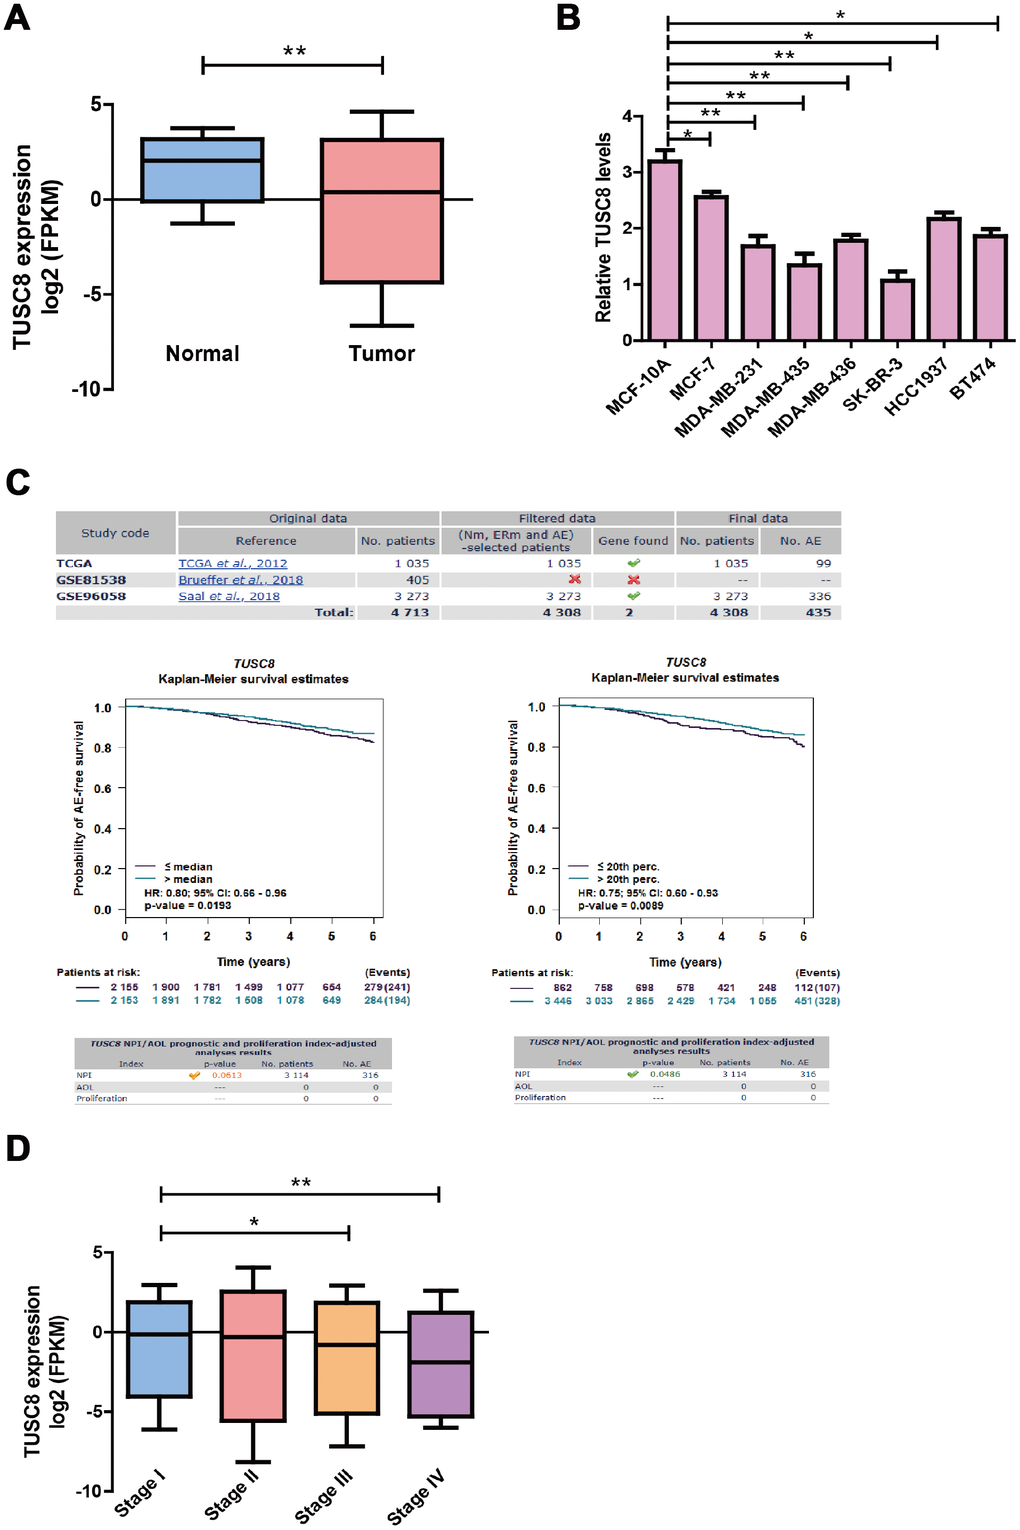 The TUSC8 is significantly down-regulated in breast cancer tissues and predicts better prognosis of breast cancer patients. (A) The down-regulation of TUSC8 expression in breast cancer samples (n=1104) compared with adjacent normal breast tissues (n=113) in TCGA database. (B) The TUSC8 expression levels were significantly down-regulated in multiple breast cancer cell lines compared with normal breast cancer cell line MCF-10A. (C) The survival curves of TUSC8 in breast cancer TCGA and GSE96058 dataset by using the median cut-off method and optimal cut-off method (20th percentage). (D) The expression levels of TUSC8 in different stages of breast cancer patients. The asterisks (*, **) indicate a significant difference (p p 